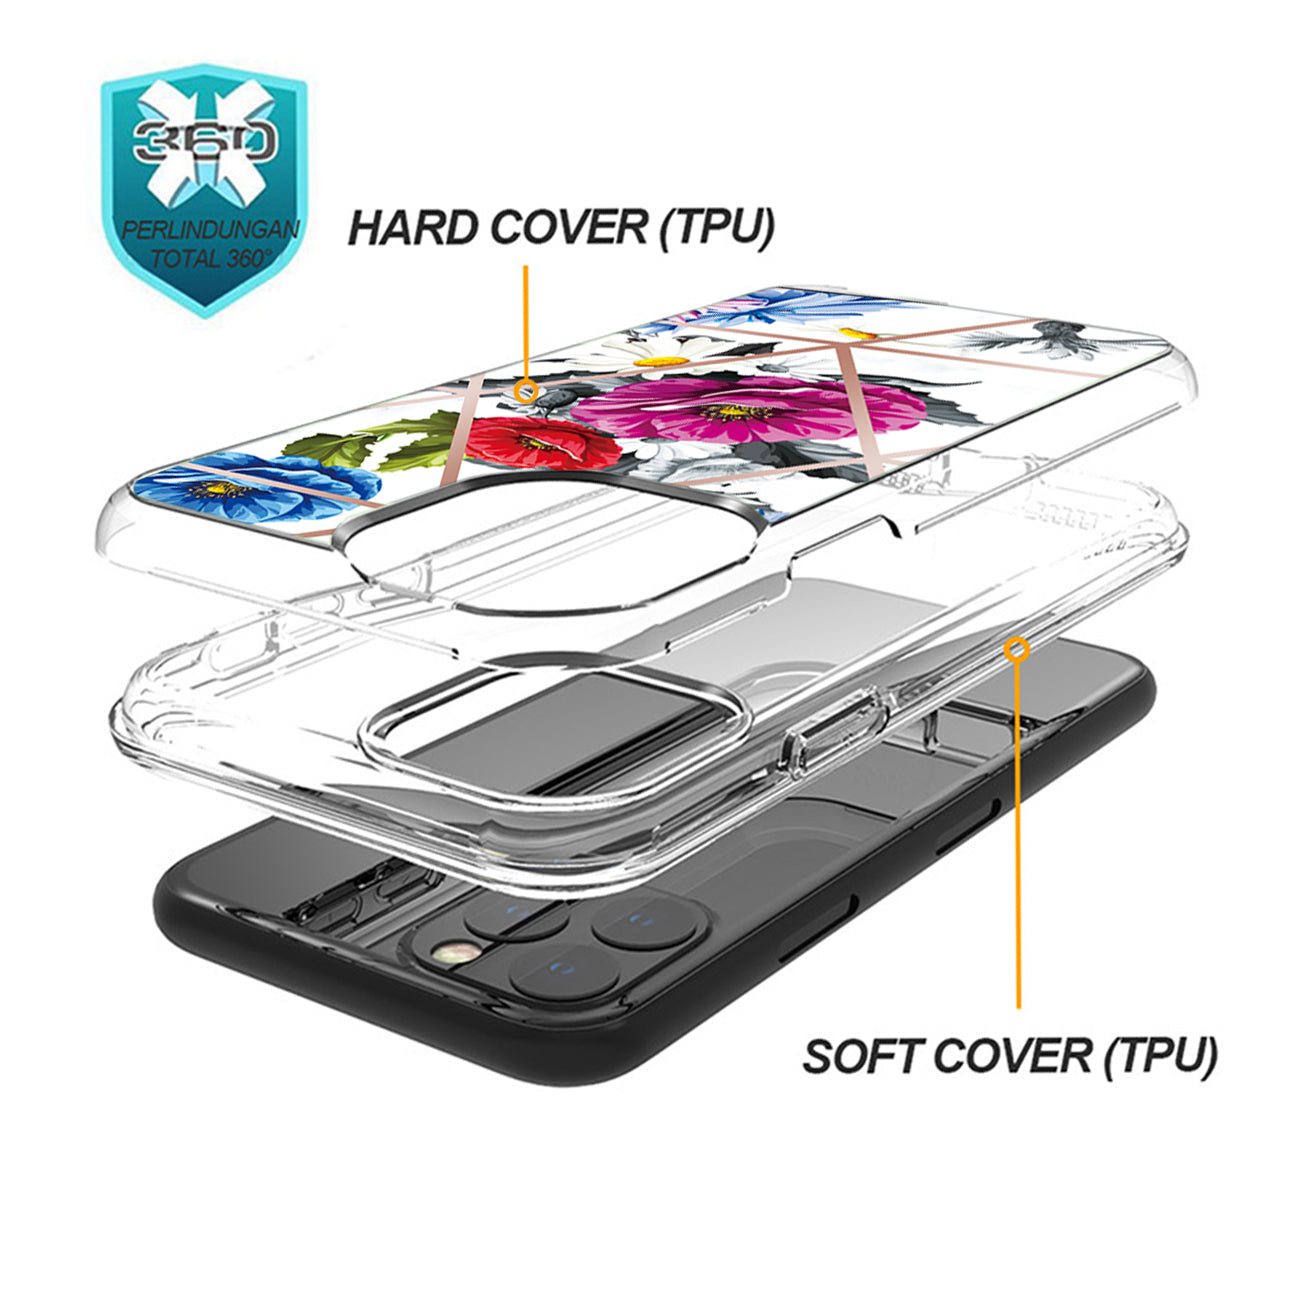 Flower Design Dual Layer Hybrid Hard & Soft TPU Case for IPH 12/IPH 12 PRO In Blue Base flower